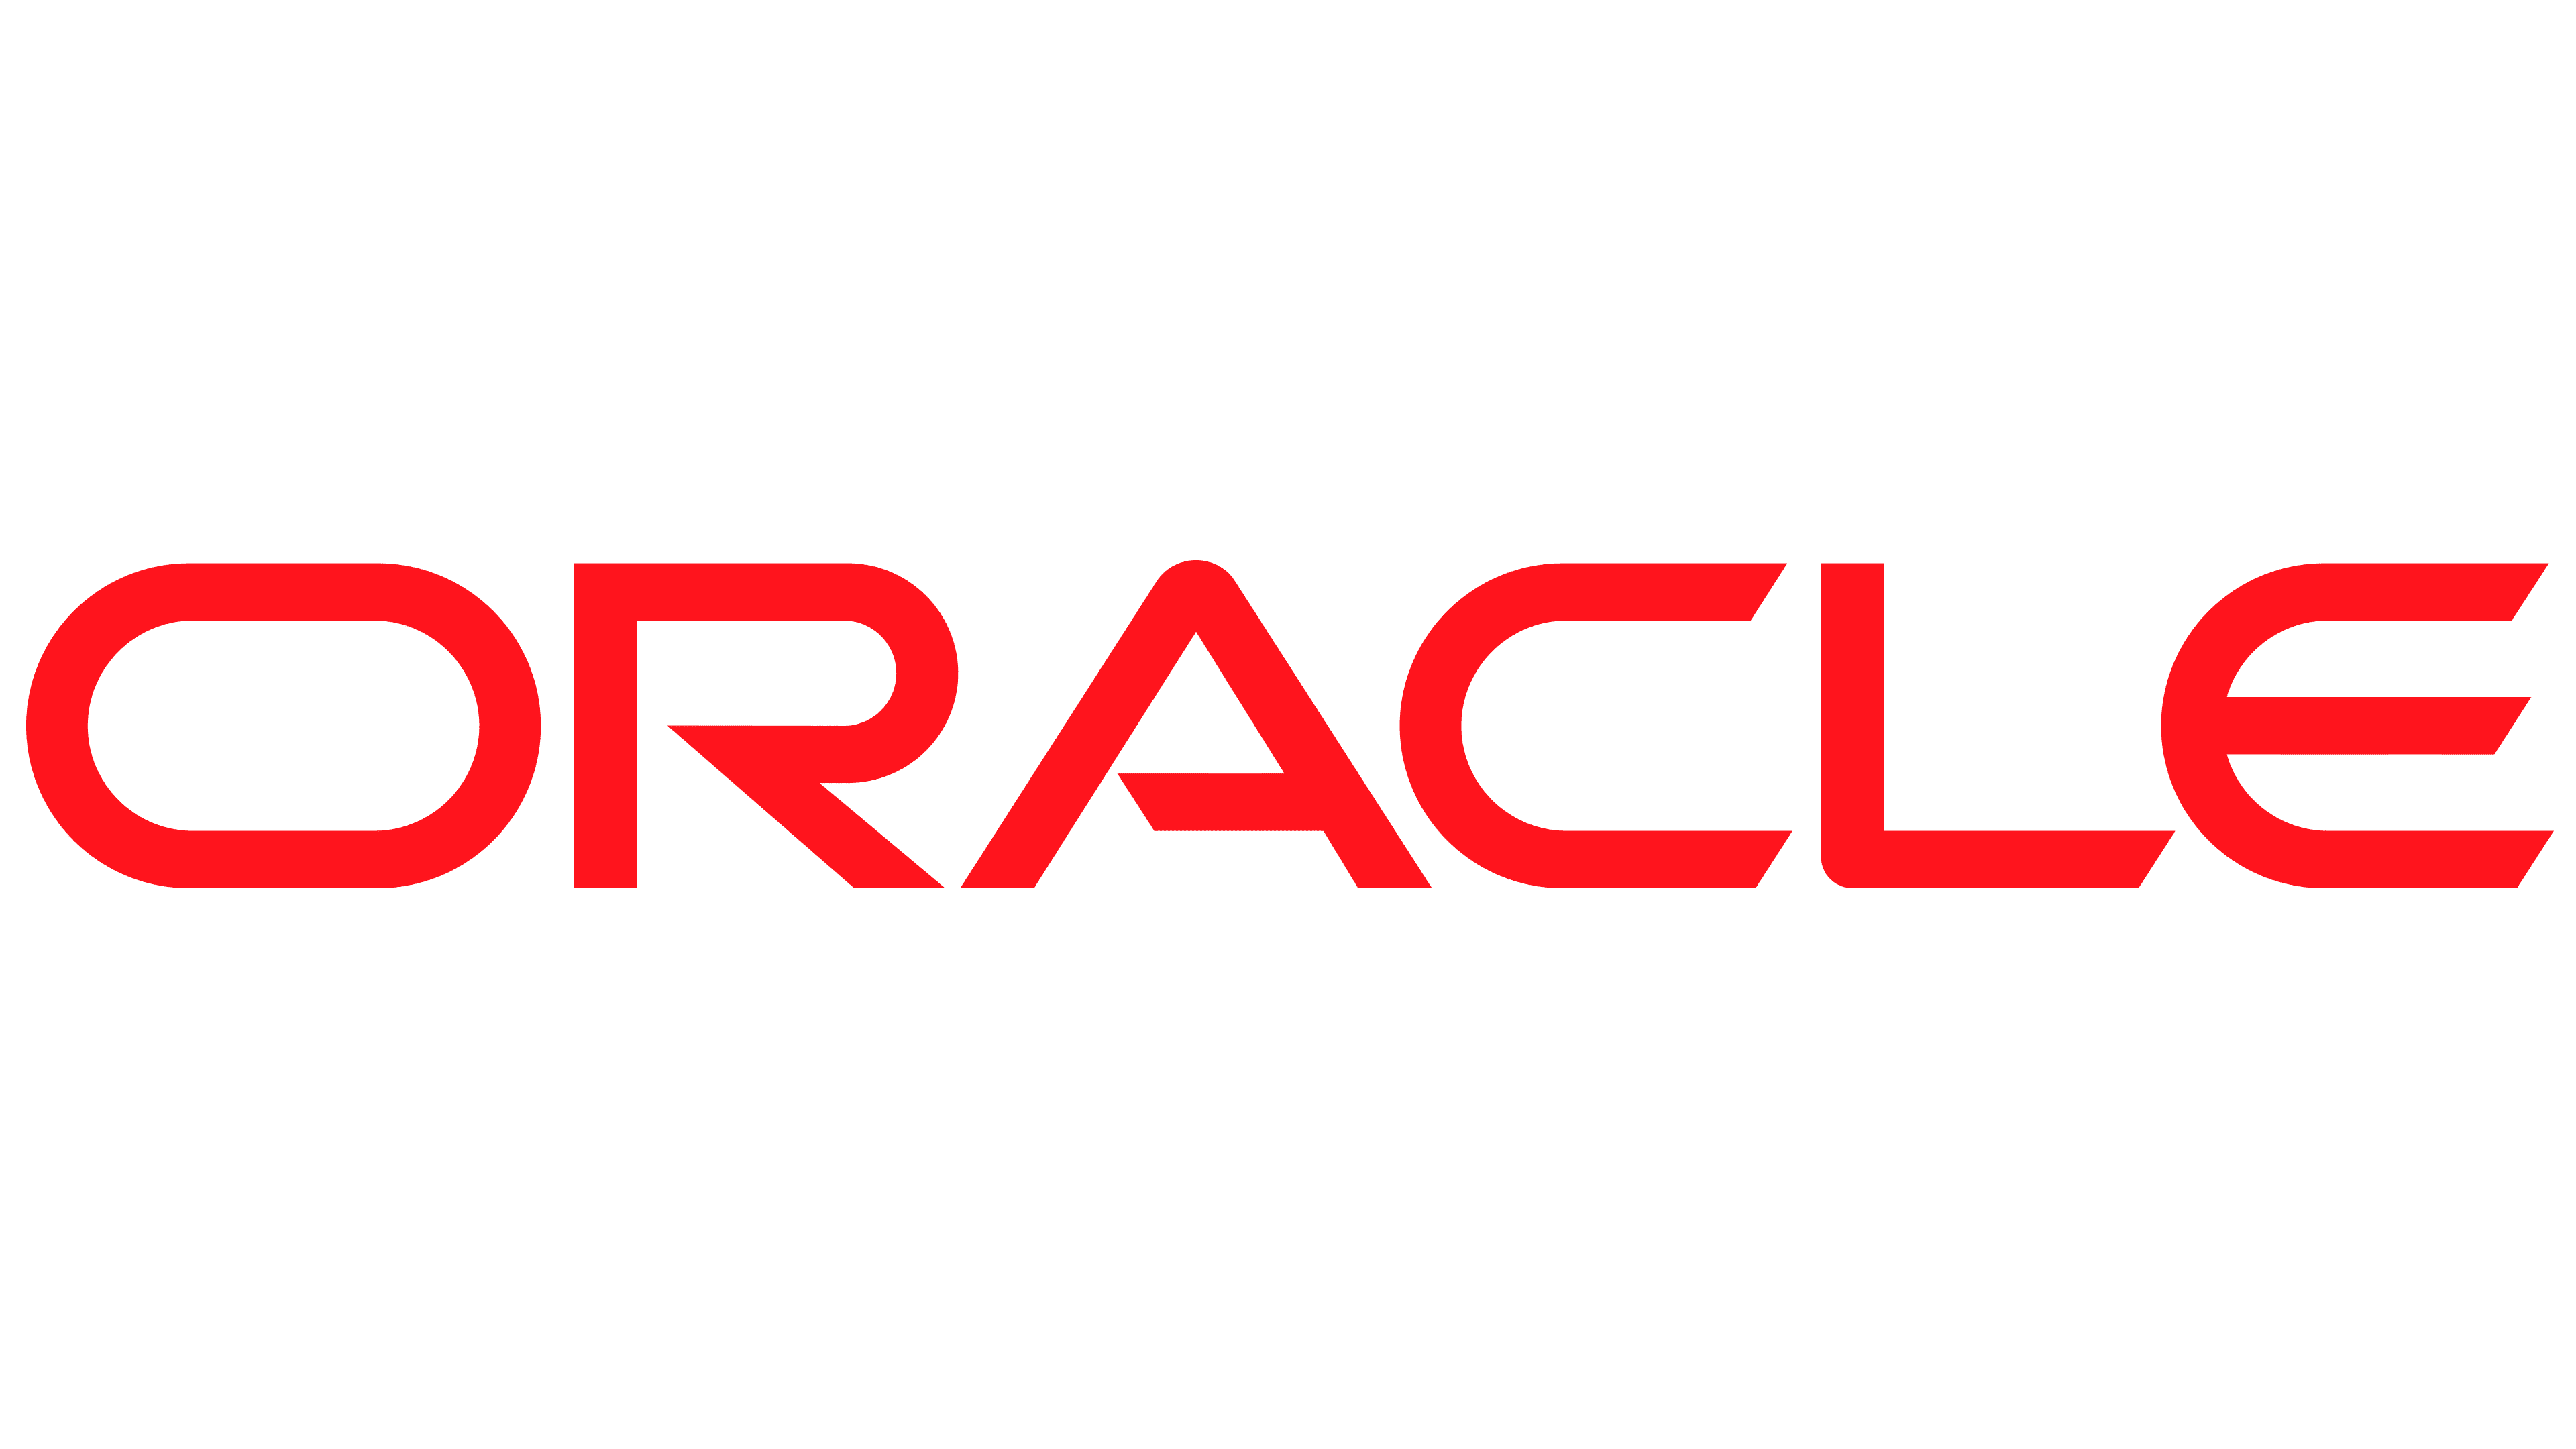 Oracle Logo | The most famous brands and company logos in the world